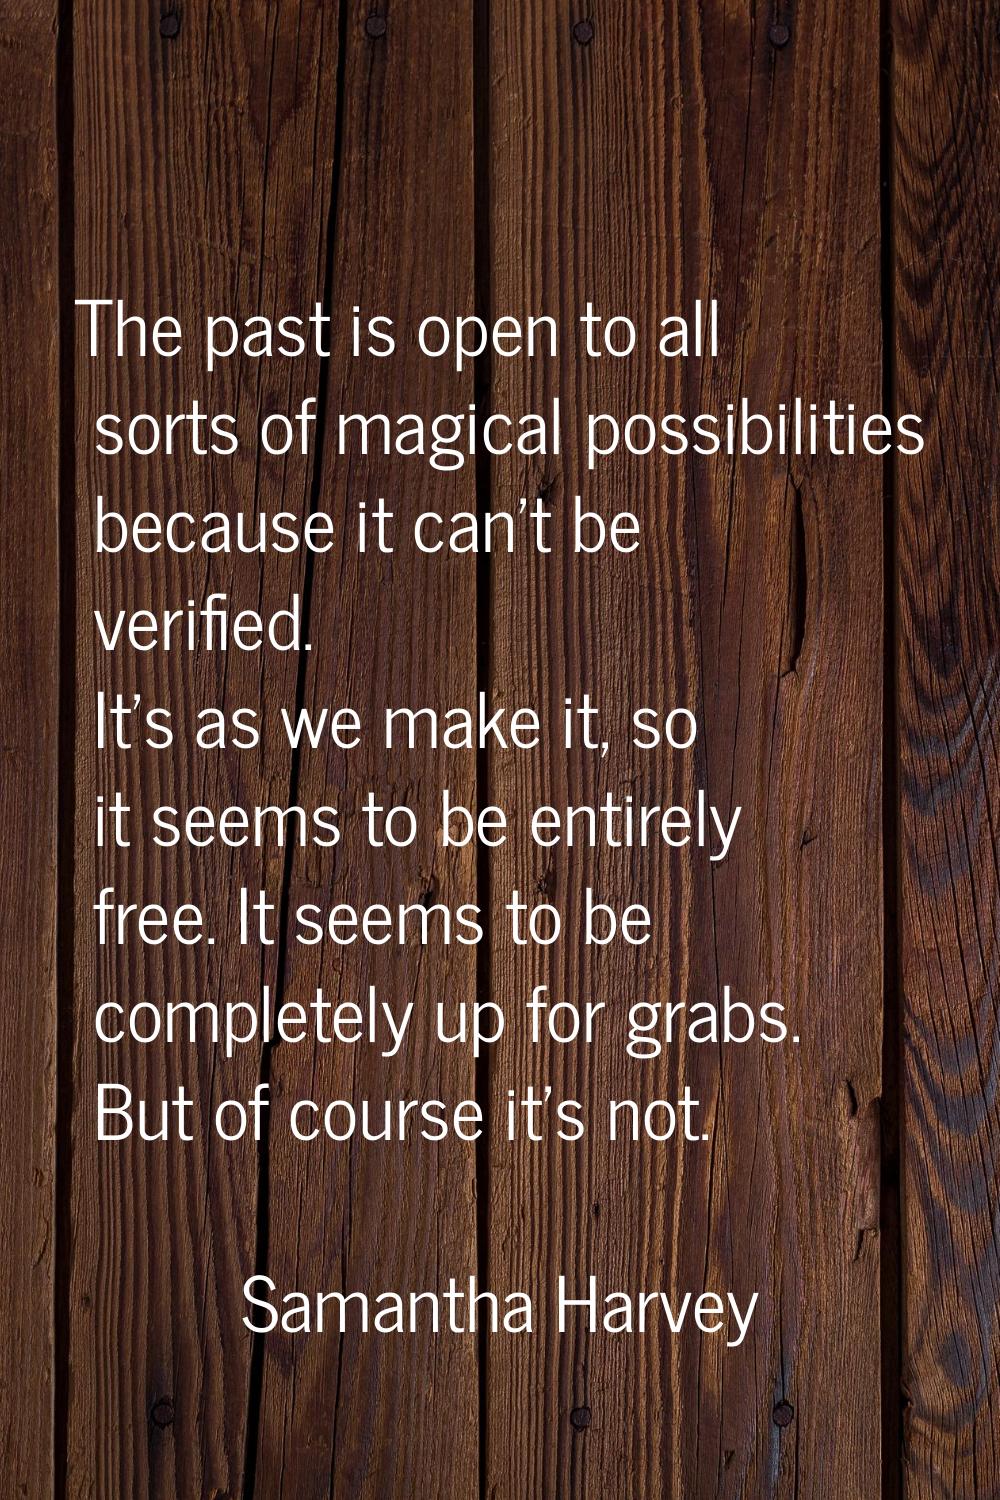 The past is open to all sorts of magical possibilities because it can't be verified. It's as we mak